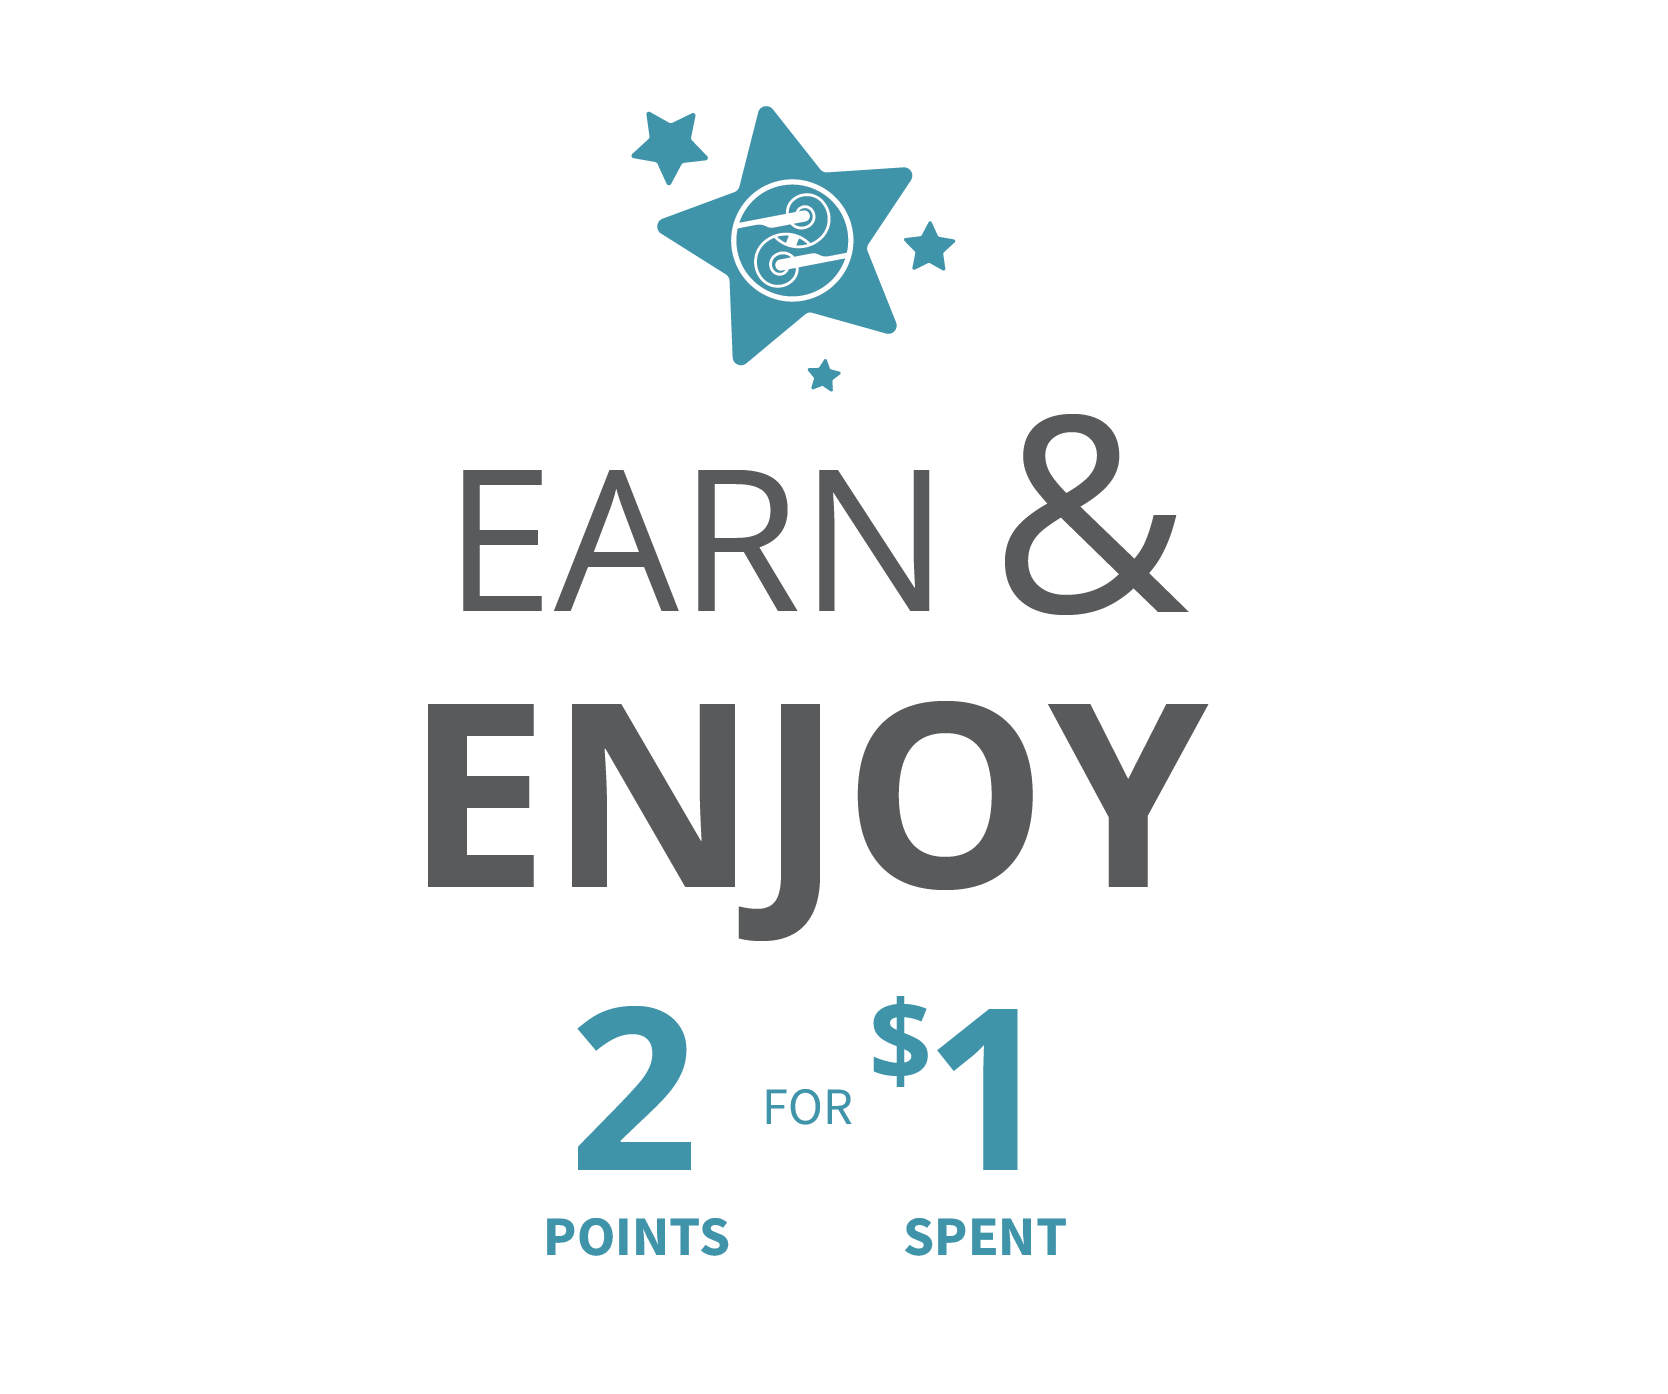 Earn and enjoy 2 points for every $1 spent